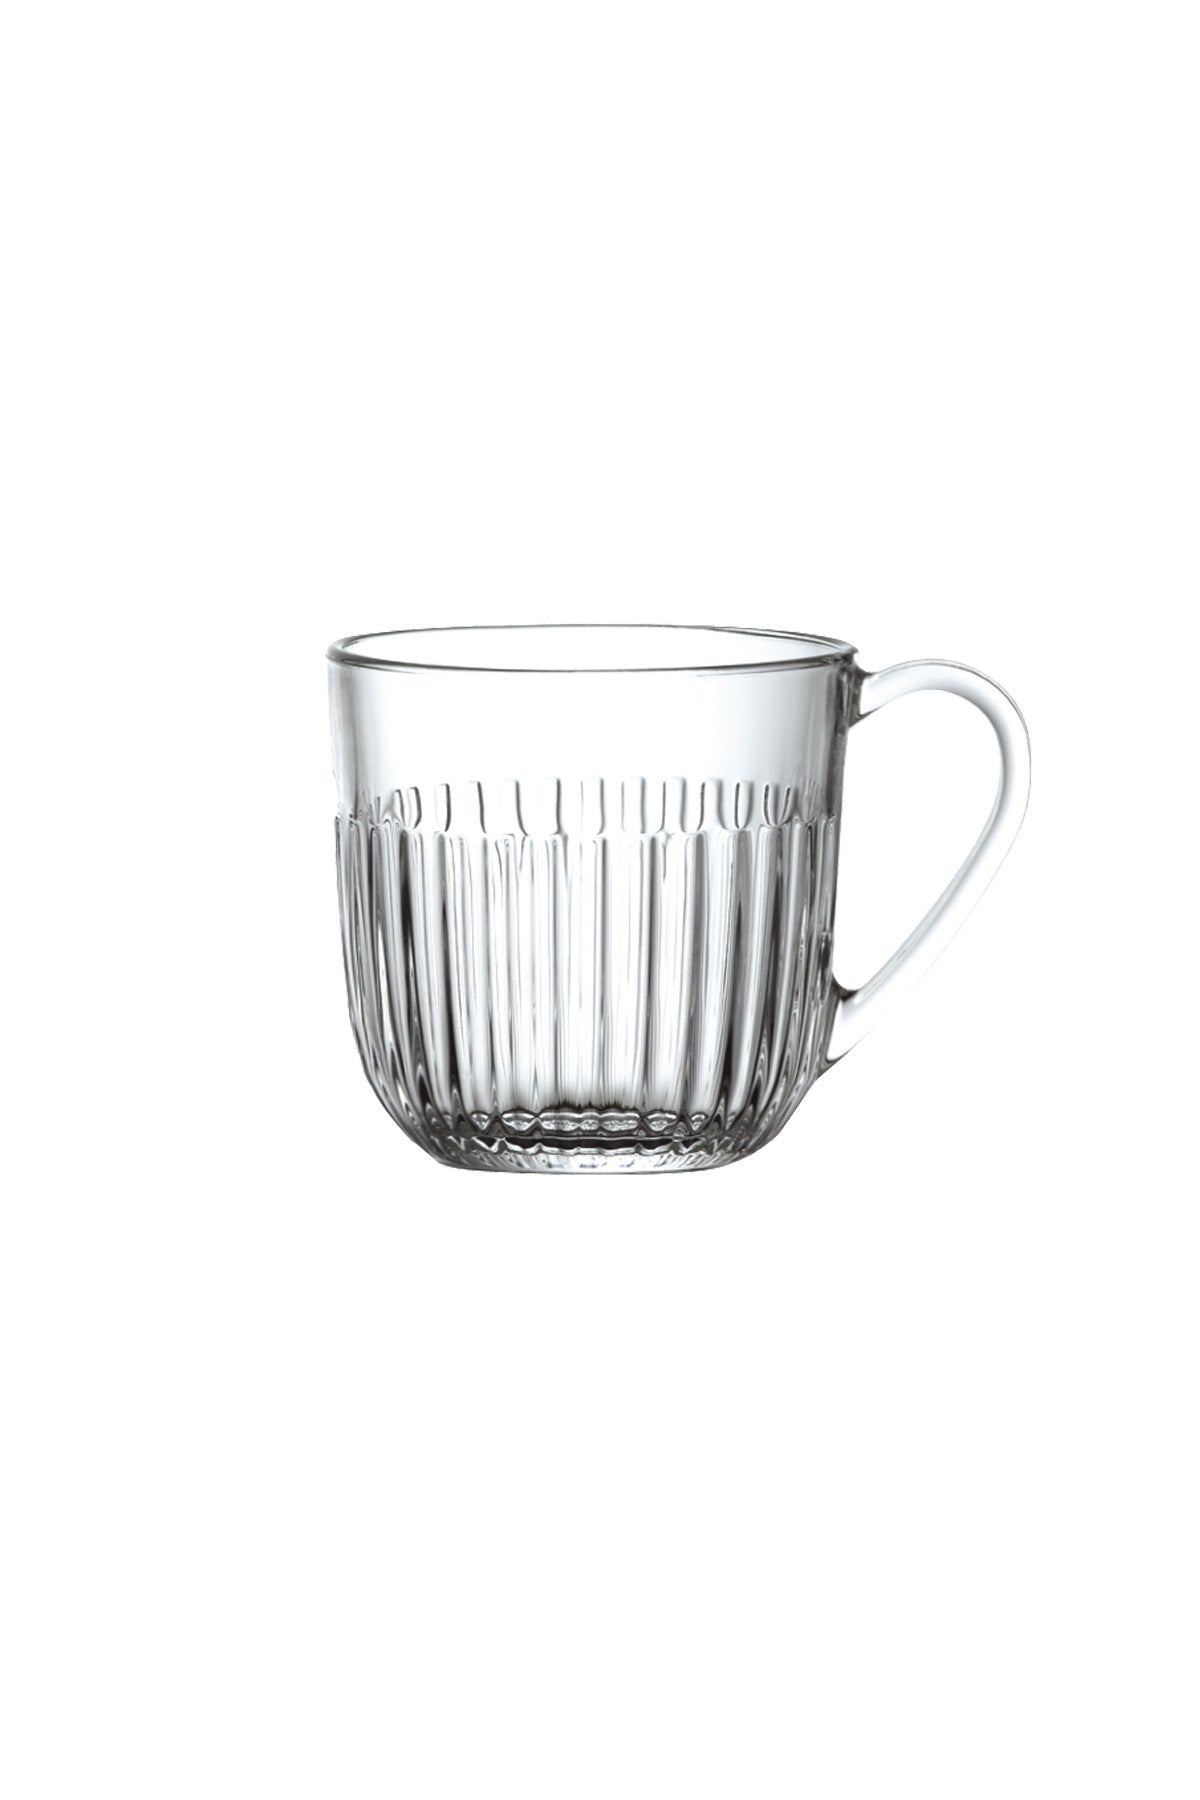 CUP 270 ml, Ouessant